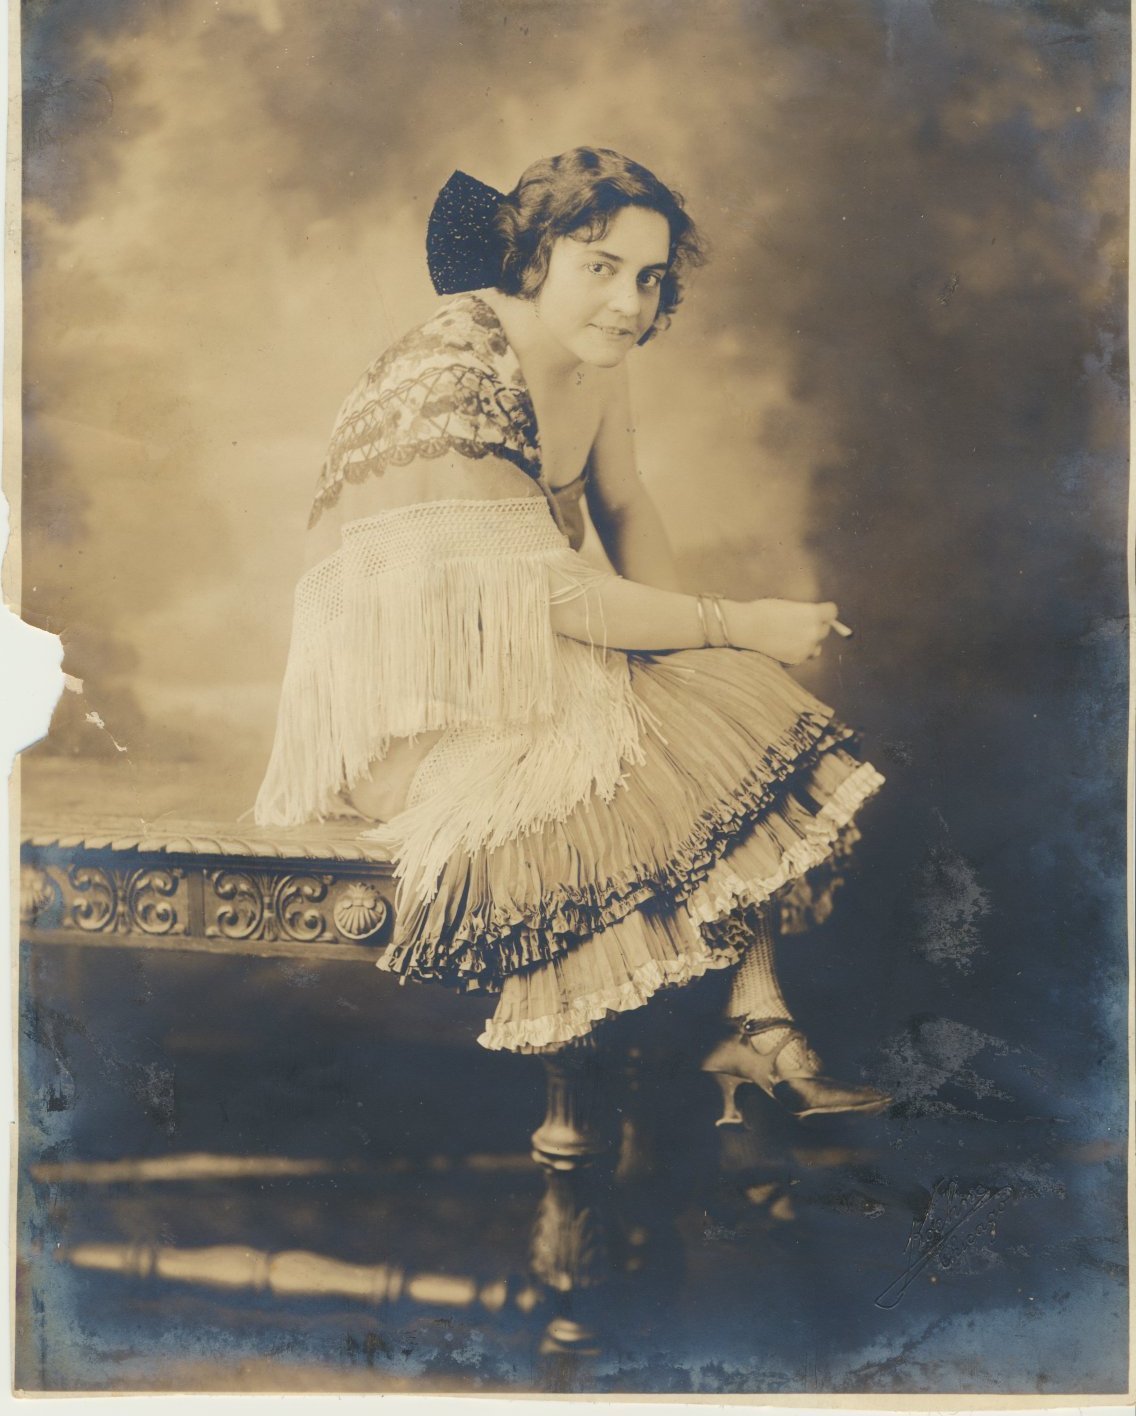 Grace Mather-Smith was legendary in Oakland for her extravagant social life and vivacious attitude. Courtesy of the Winter Garden Heritage Foundation.